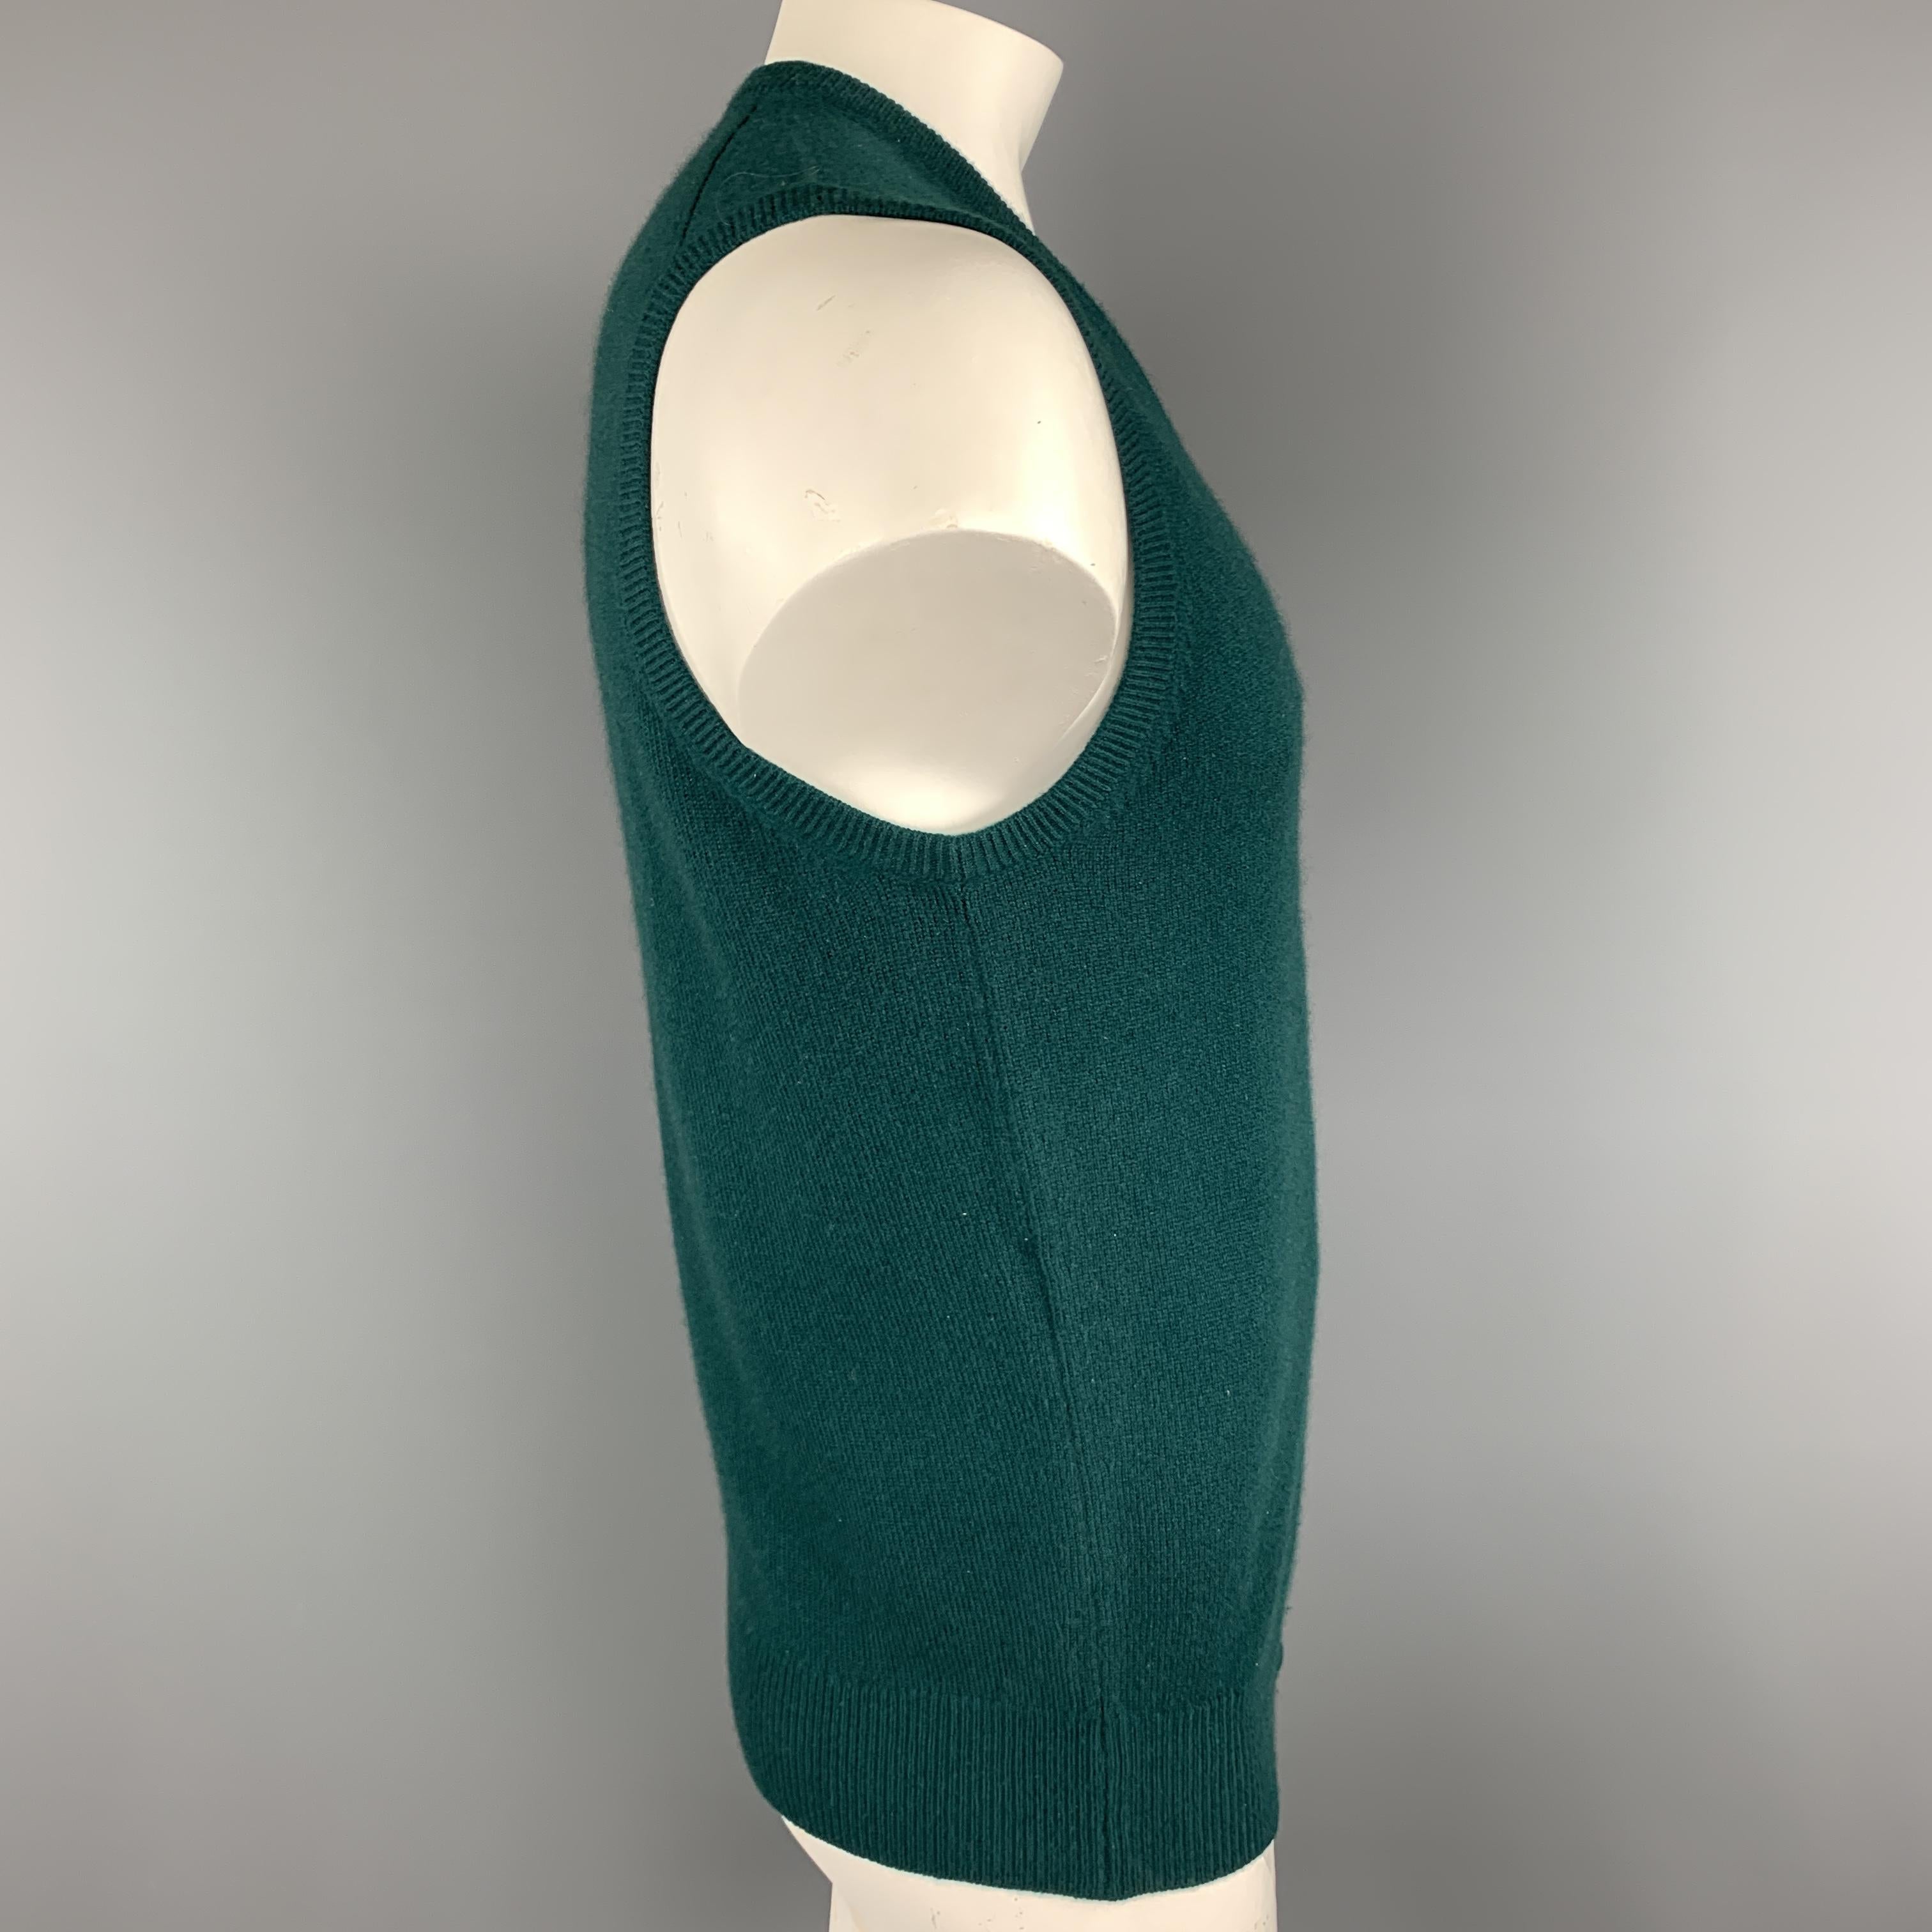 BALLANTYNE sweater vest comes in cashmere knit with a v neck. Made in Scotland.

Excellent Pre-Owned Condition.
Marked: XL

Measurements:

Shoulder: 17 in.
Chest: 44 in.
Length: 28 in. 